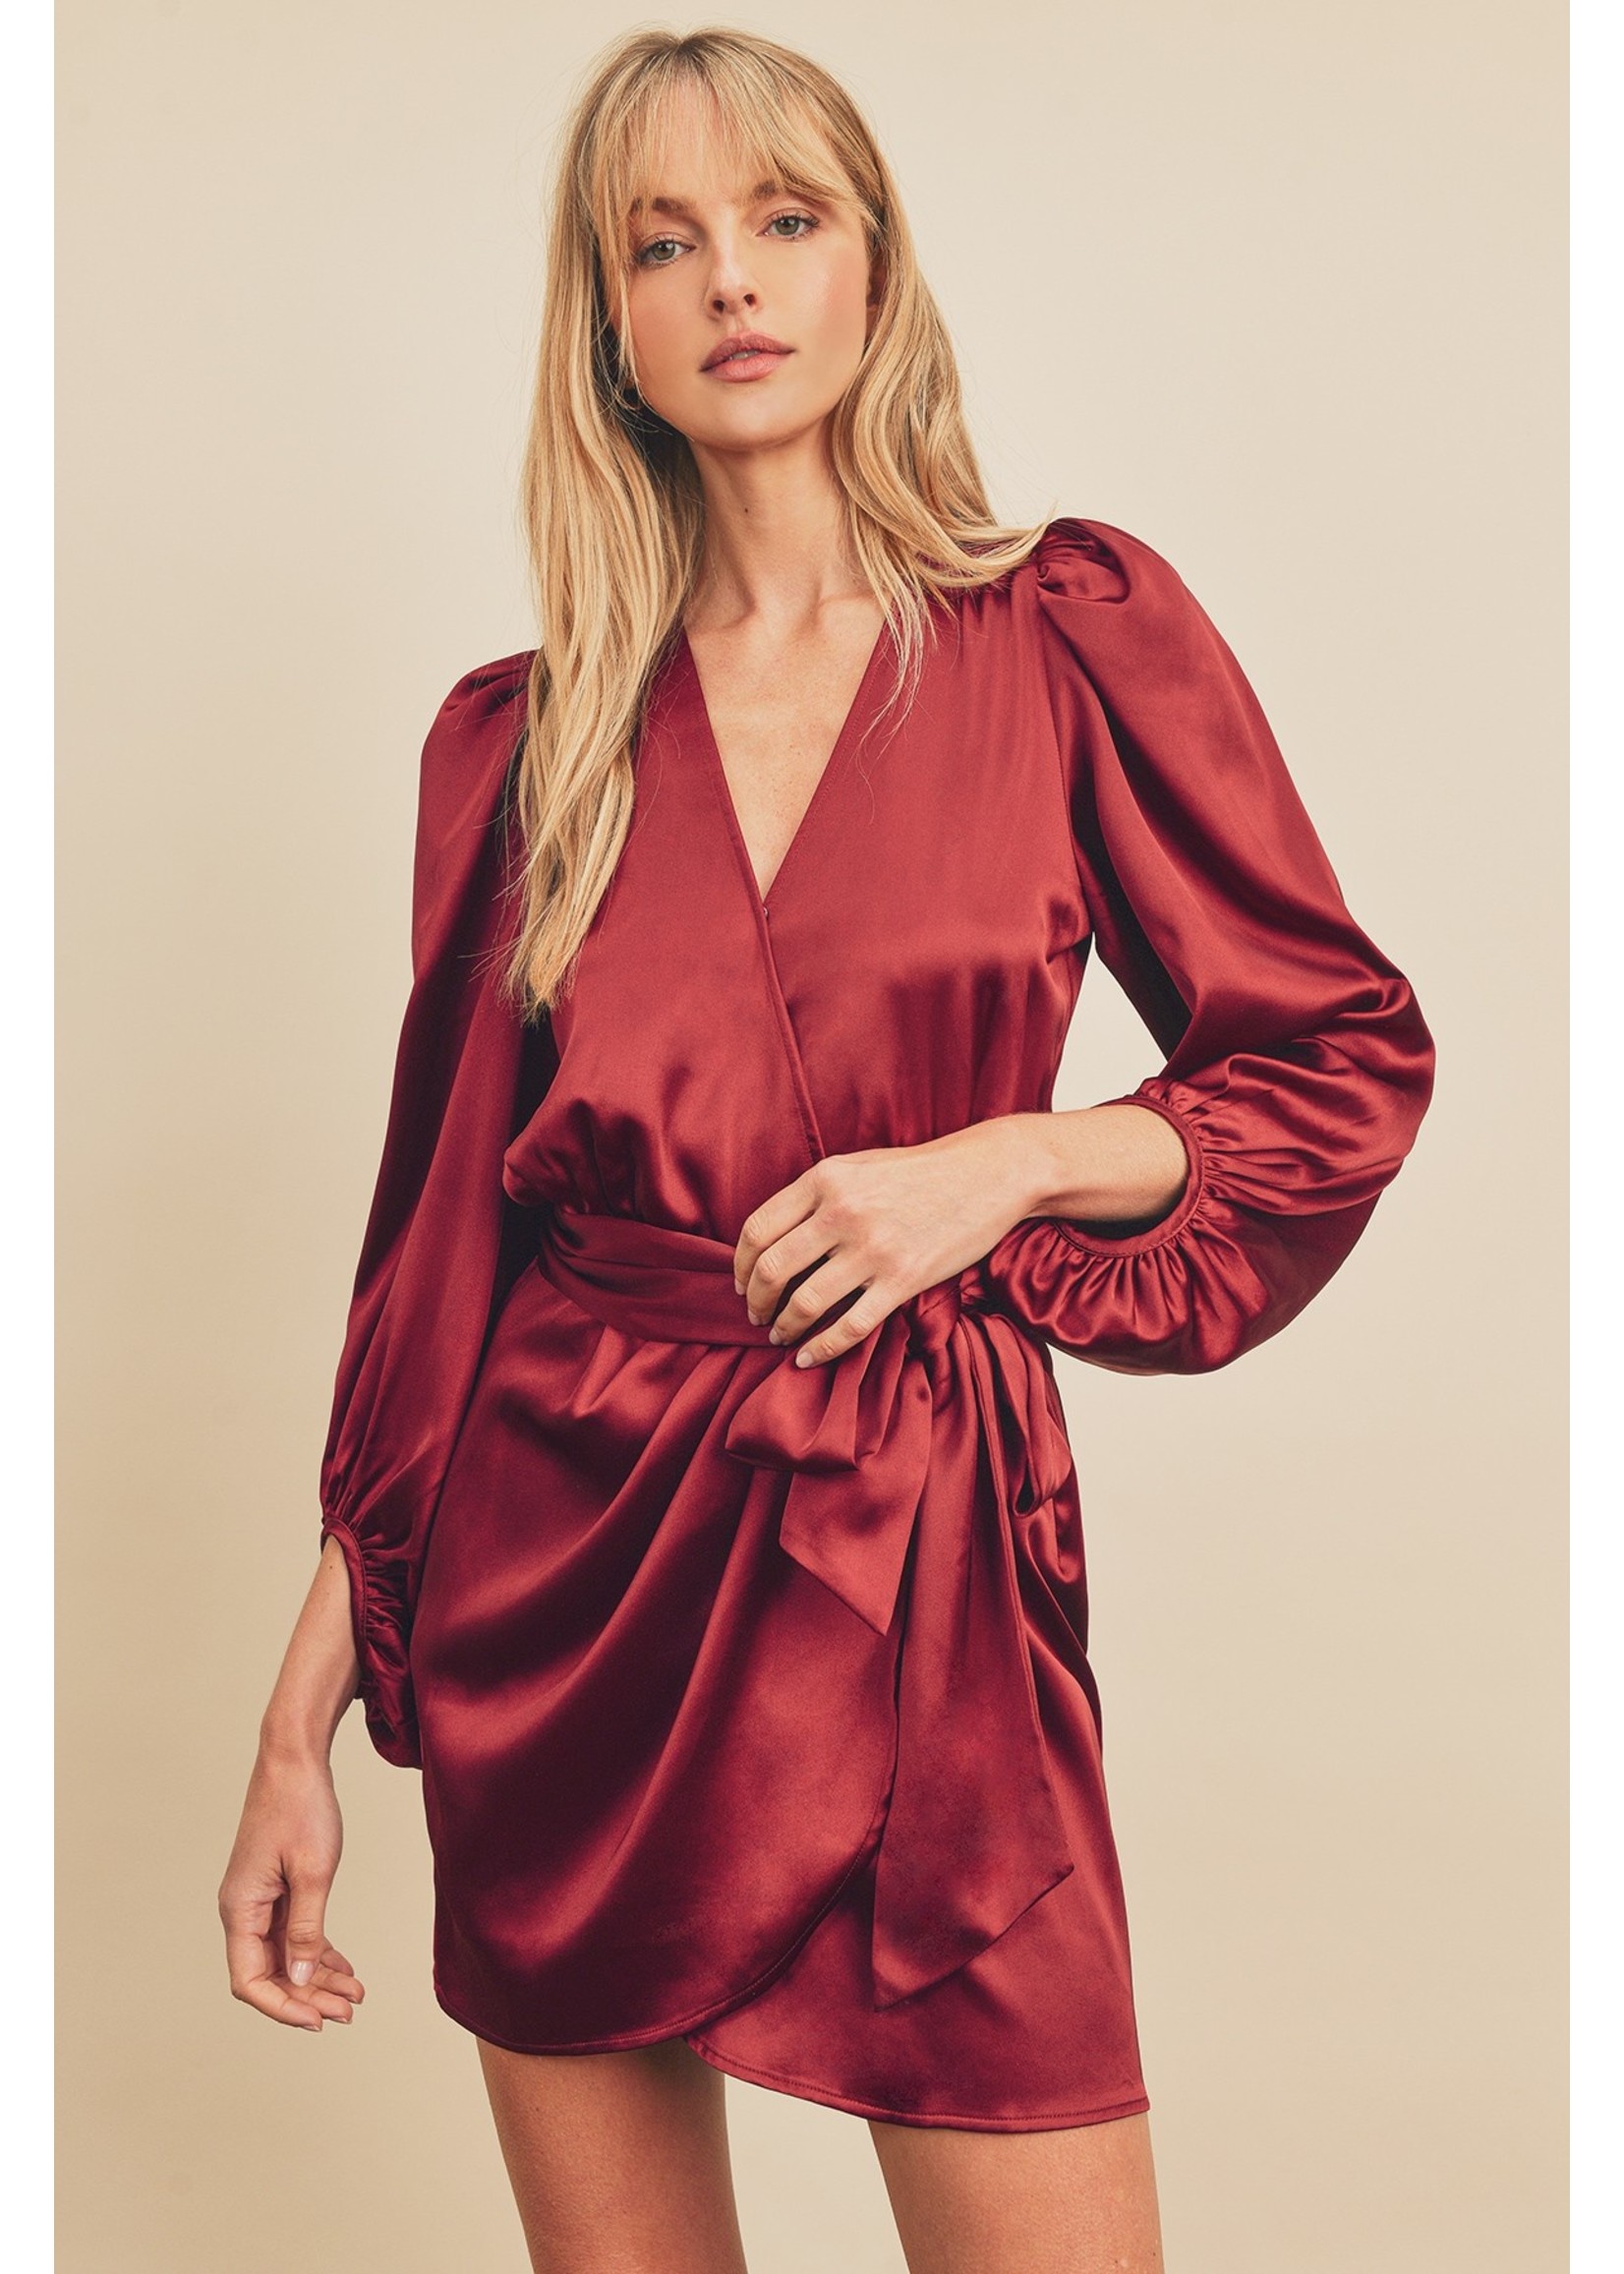 The A Grand Party Satin Wrap Dress